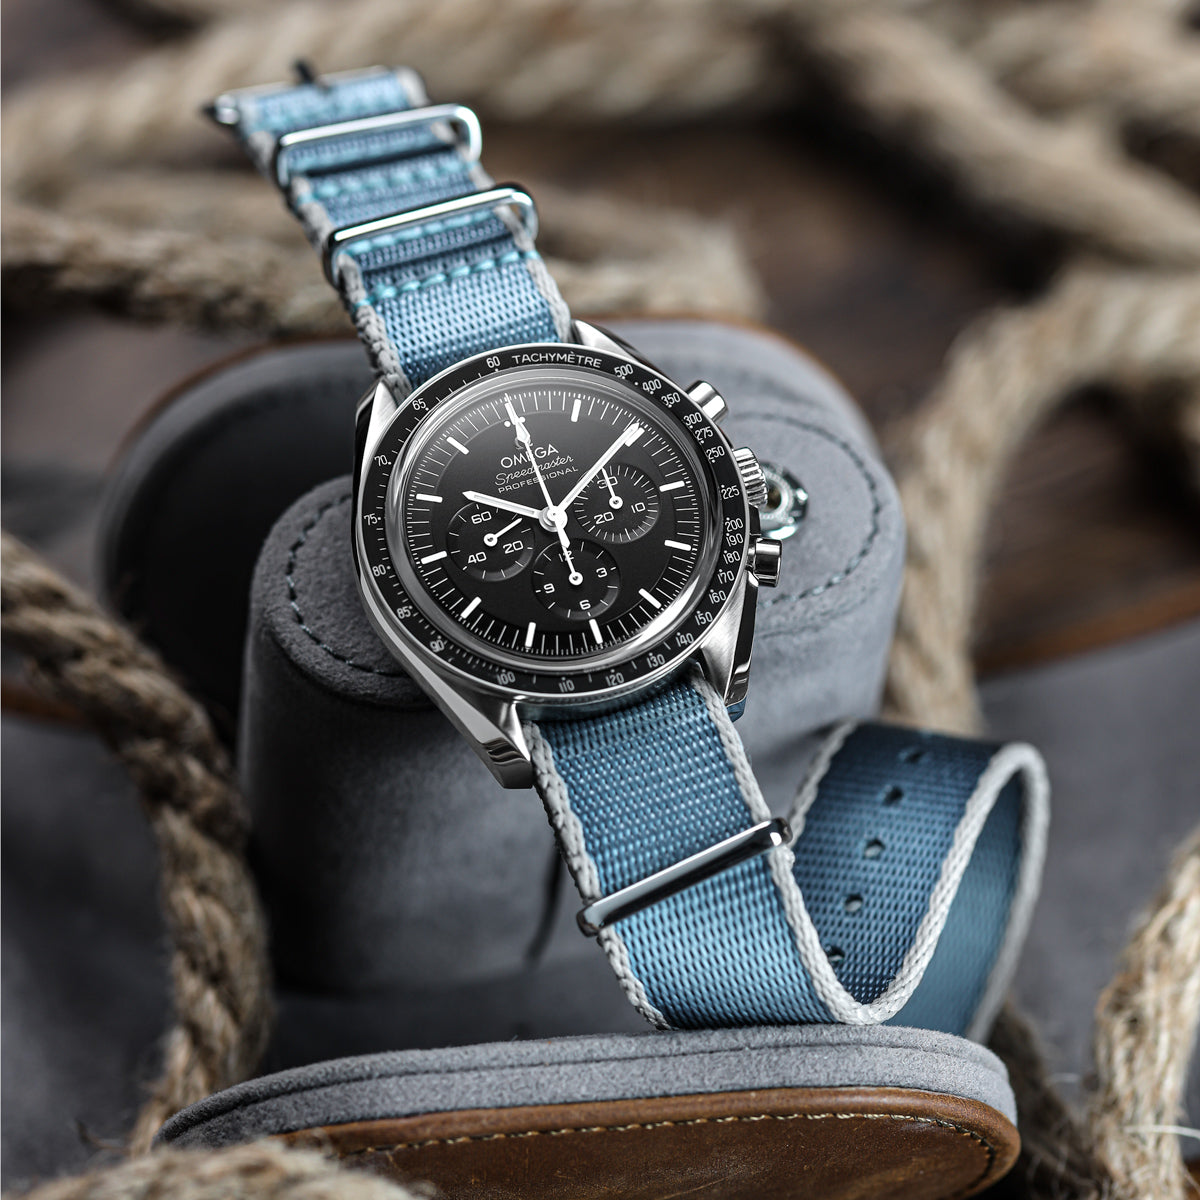 ZULUDIVER Iridescent Linen Weave Military Nylon Watch Strap - Blue/Grey - additional image 1